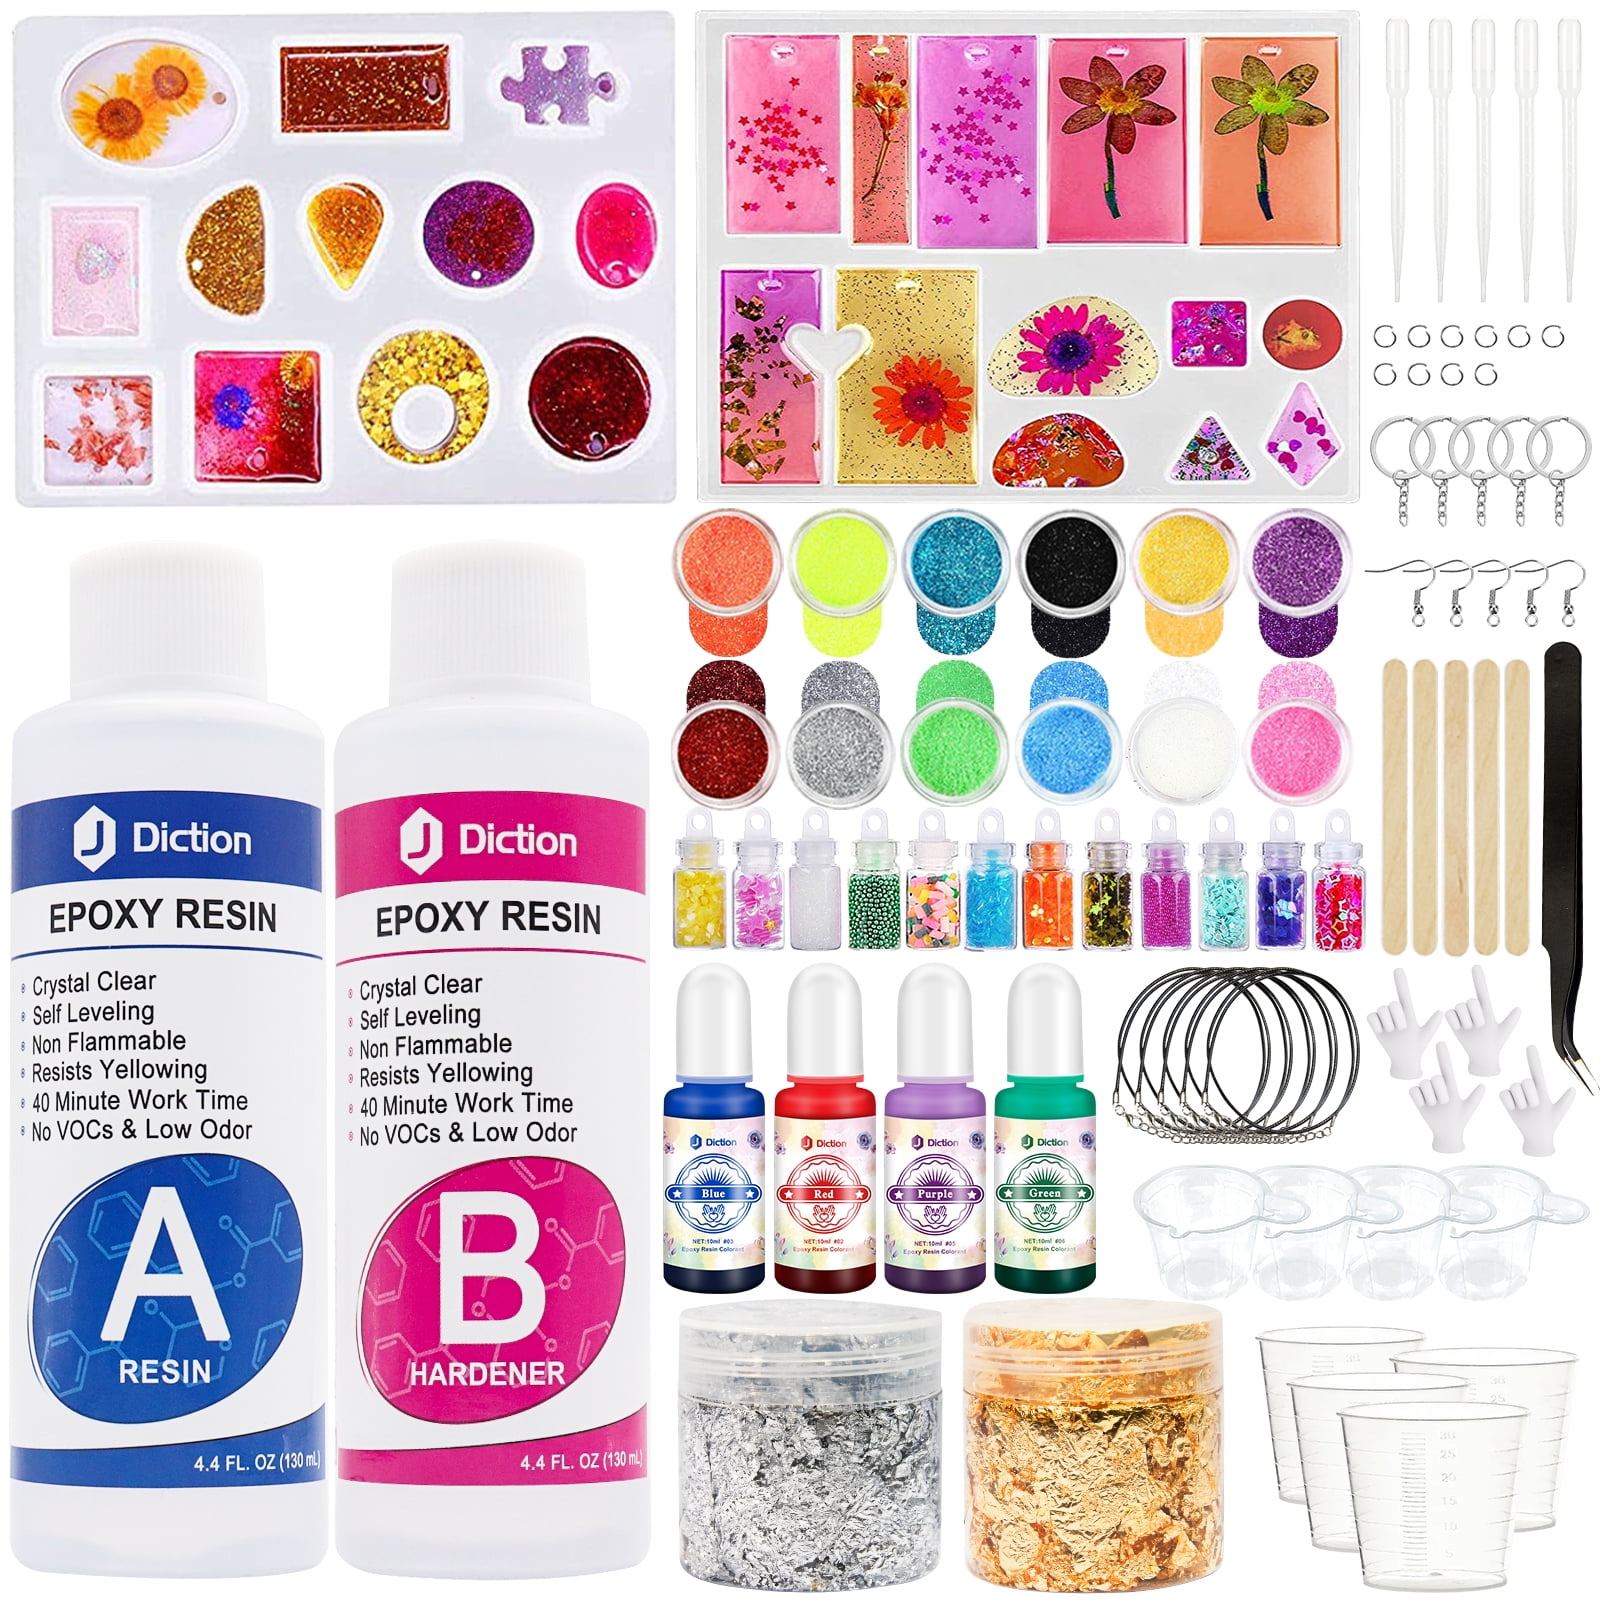  Modda Epoxy Resin Kit with Video Course, Includes Color  Pigment, Silicone molds, Necklace Cord, Earring Hooks for Jewelry Making,  Epoxy Resin Starter Kit for Beginners, Adults, Complete Craft Set